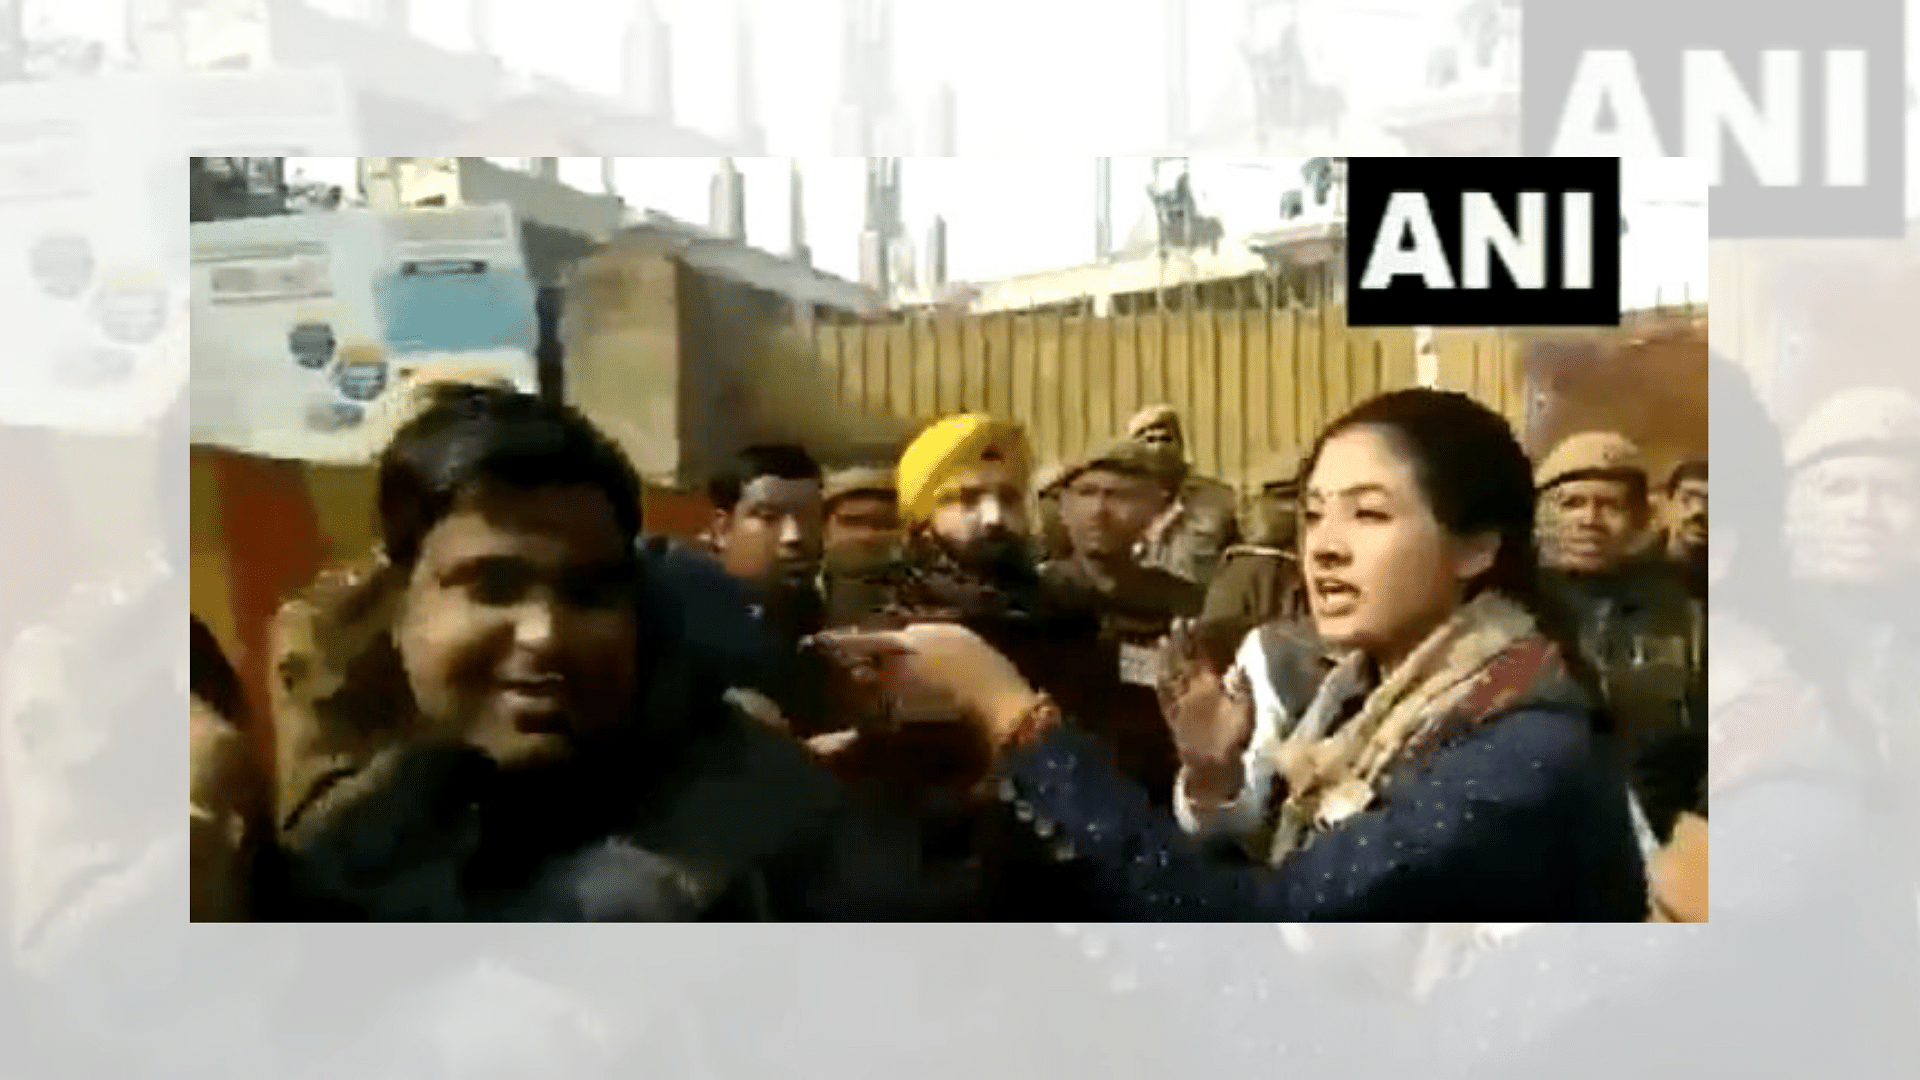 Congress’ Alka Lamba gets into brawl with AAP worker near polling booth.